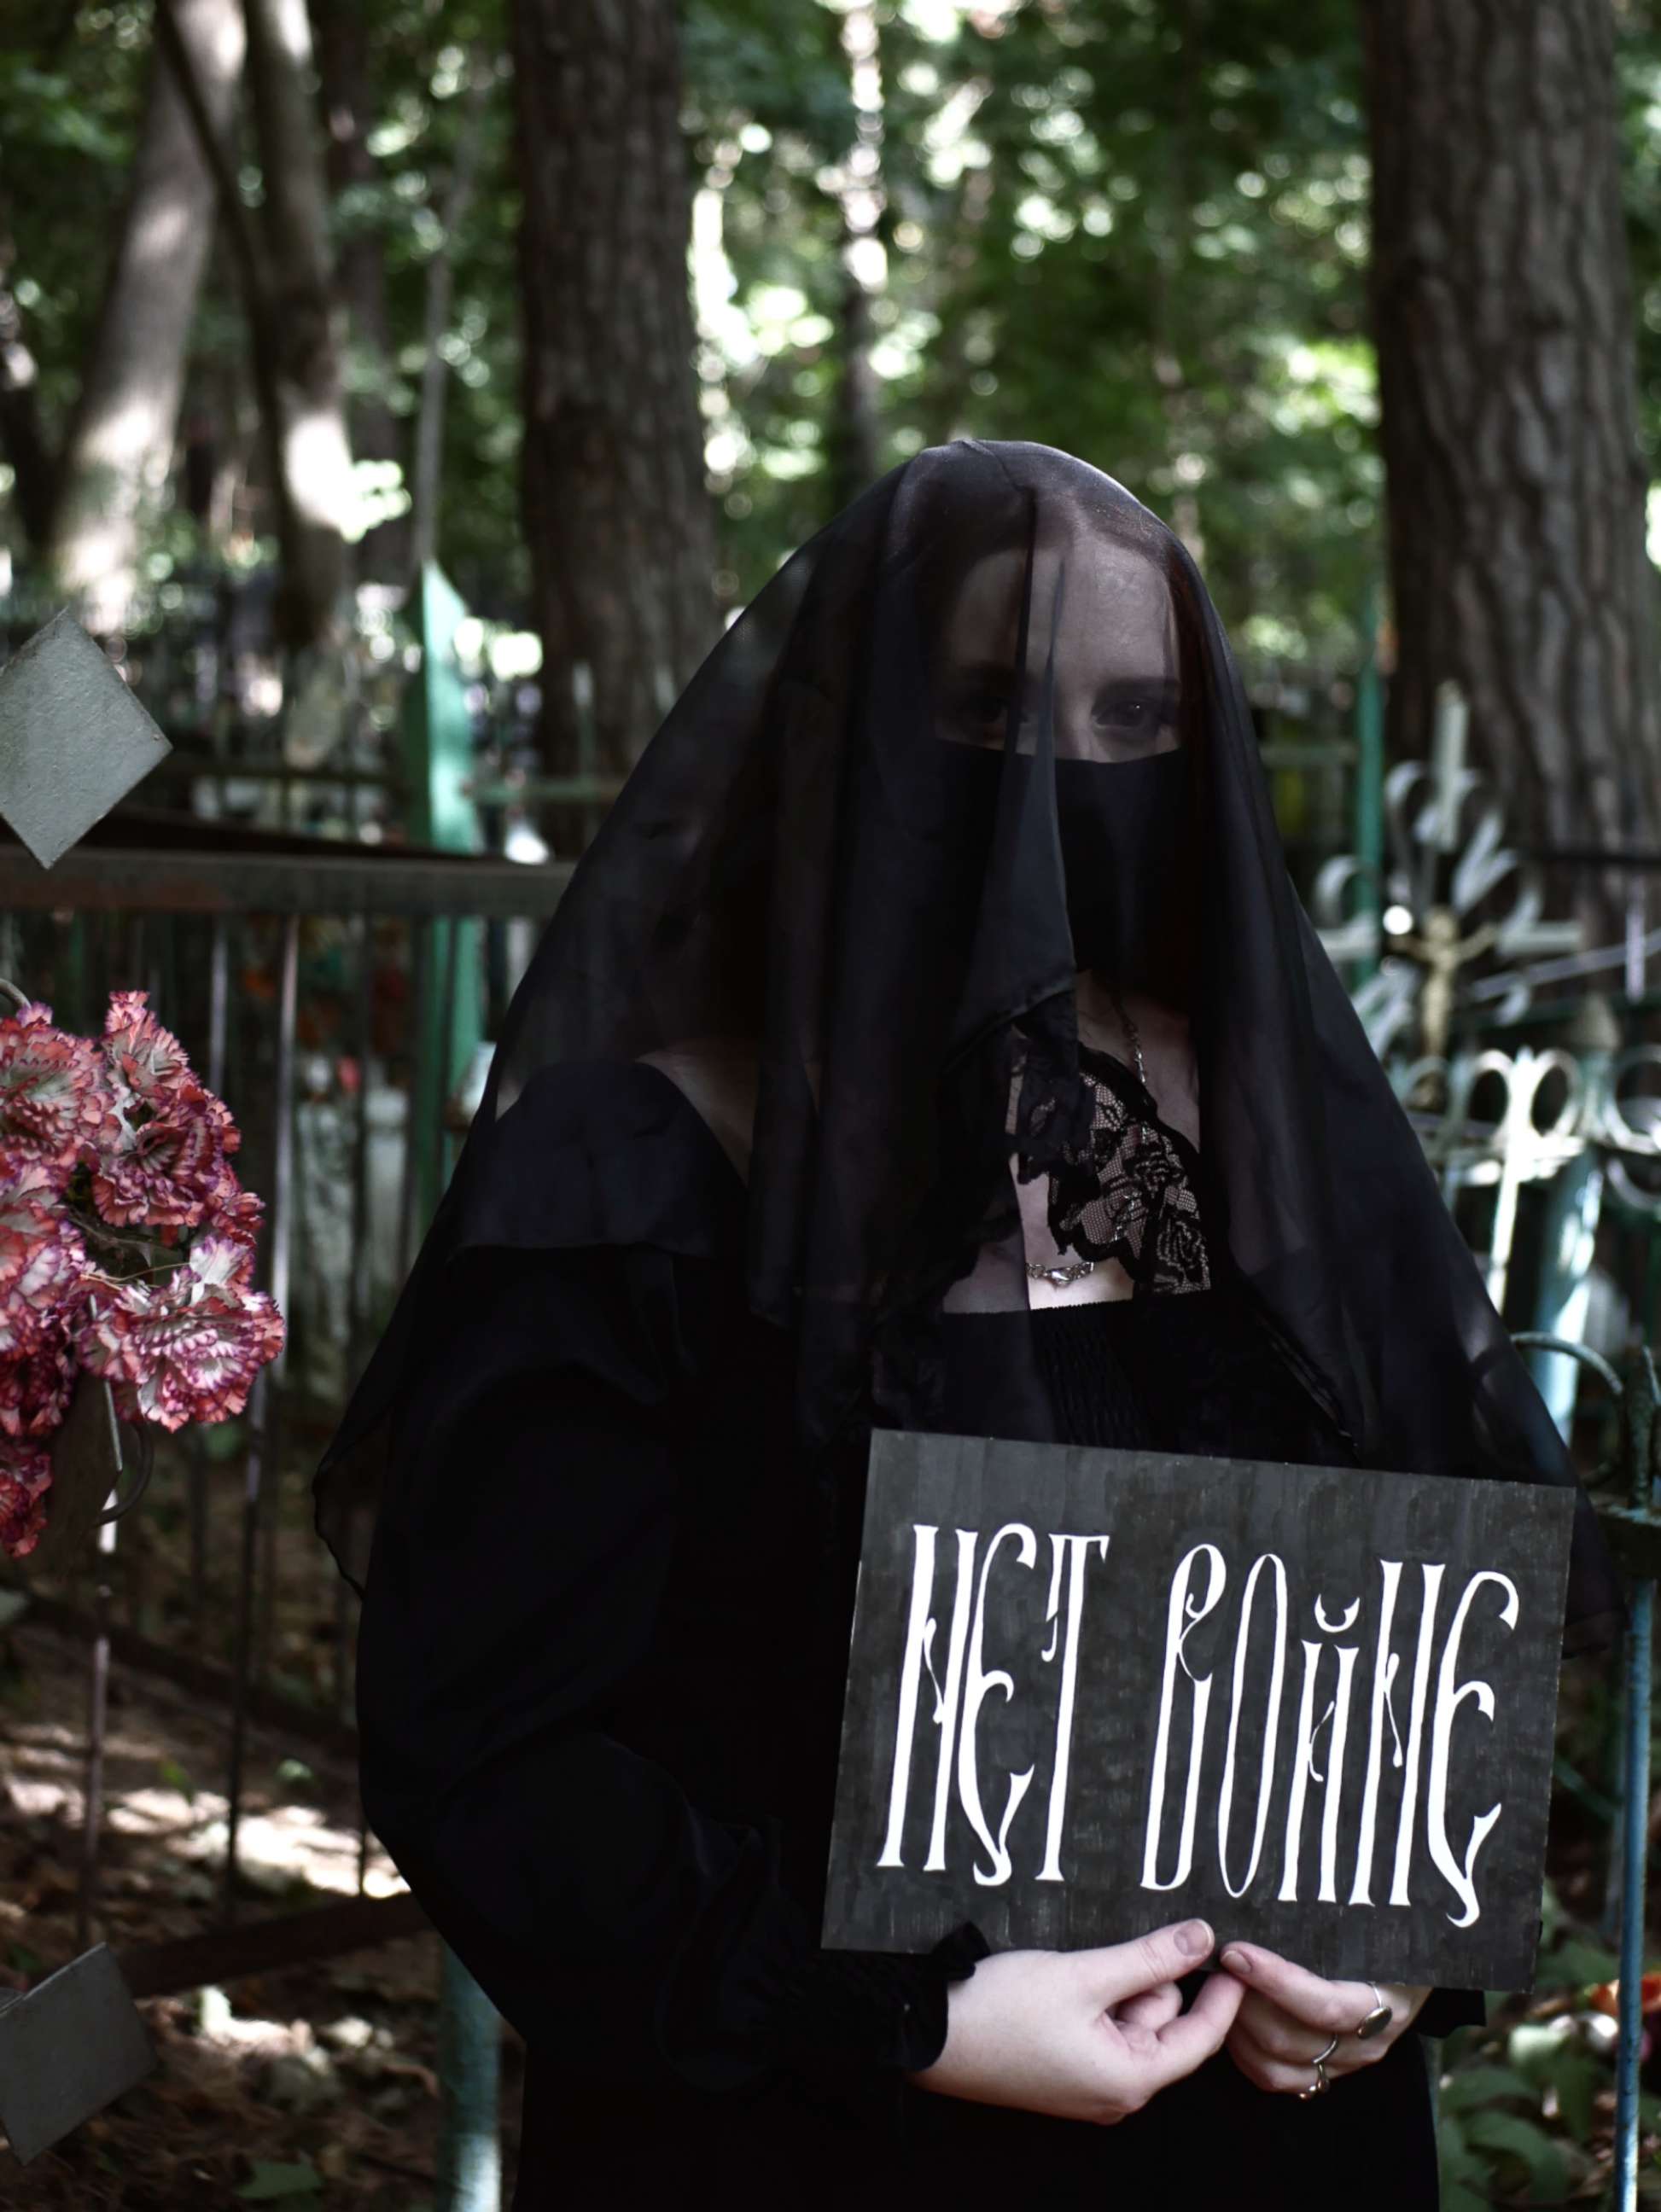 PHOTO: Anti-war activist, who asked to be called the pseudonym Elmatava, poses in traditional funeral attire with a sign that reads "no to war" in Cyrillic script, at a cemetery outside Moscow in late September.